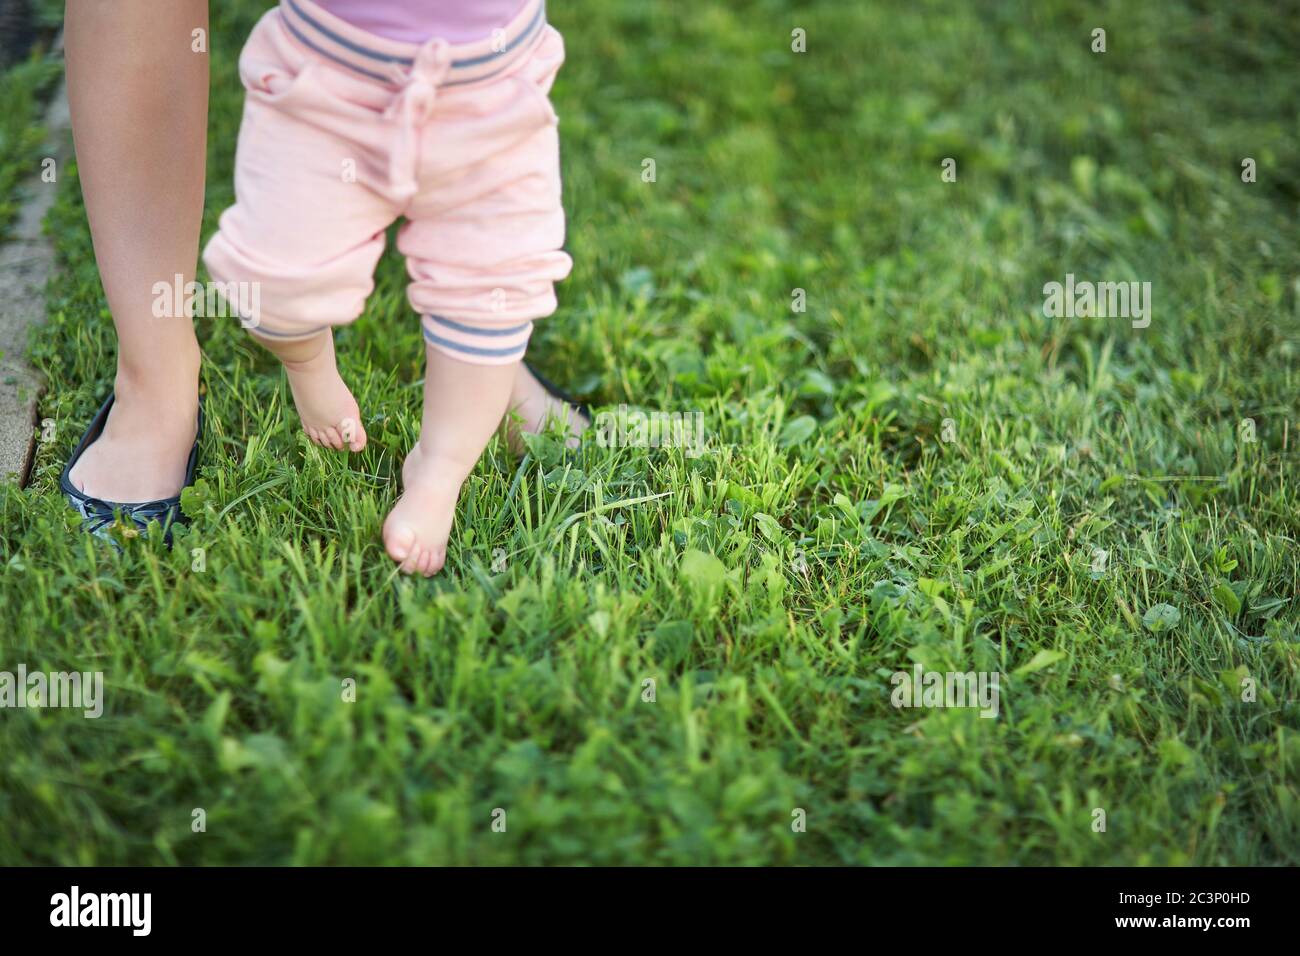 Mother teaching her baby to take the first steps barefoot on the grass. Stock Photo